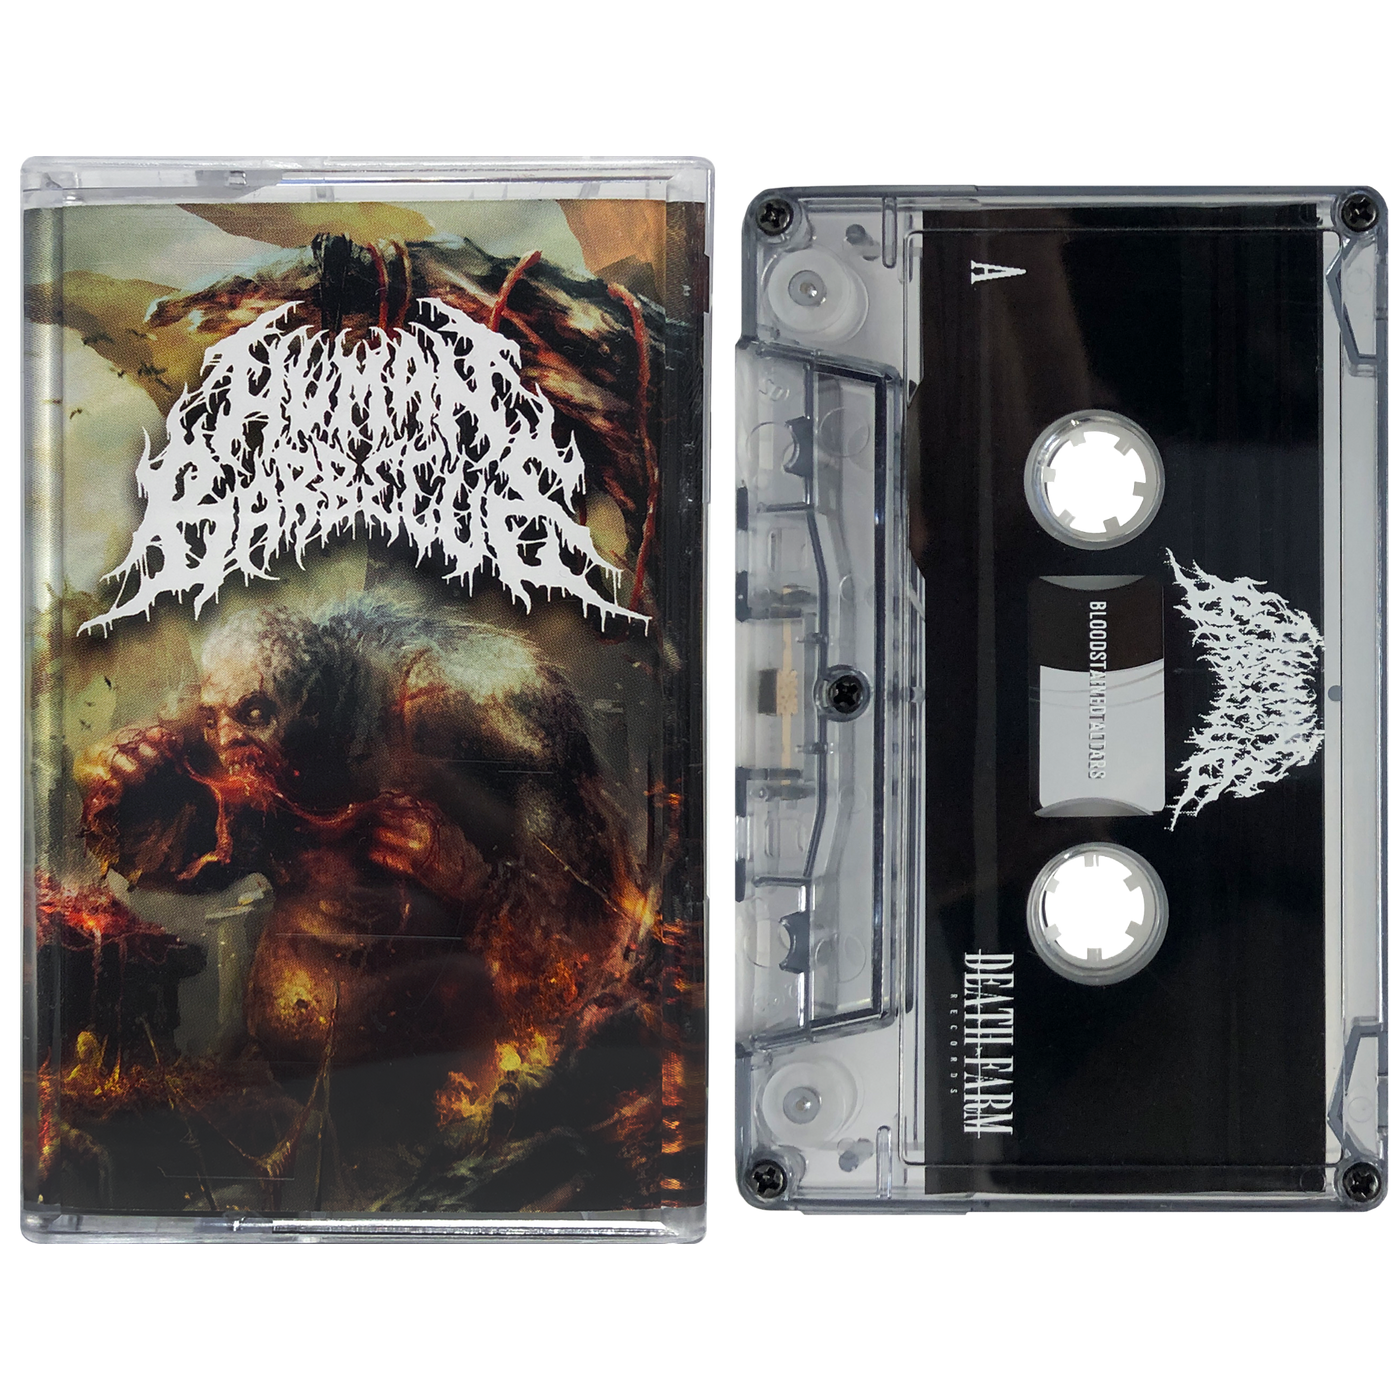 Human Barbecue ‎'Bloodstained Altars' Cassette